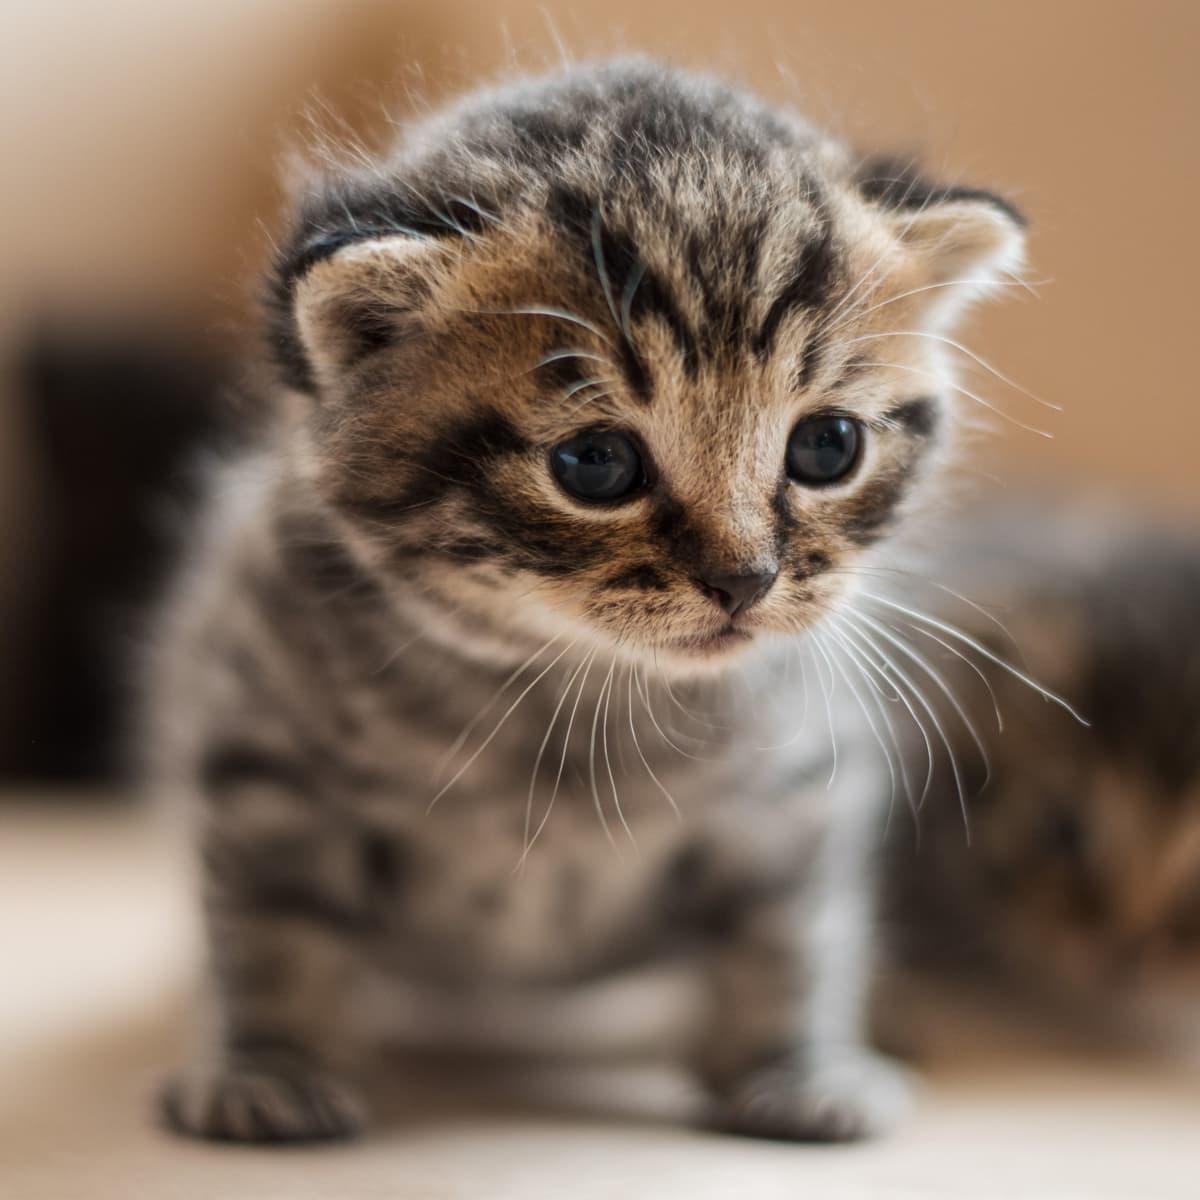 Validated! Watching Cute Cat Videos Boosts Productivity